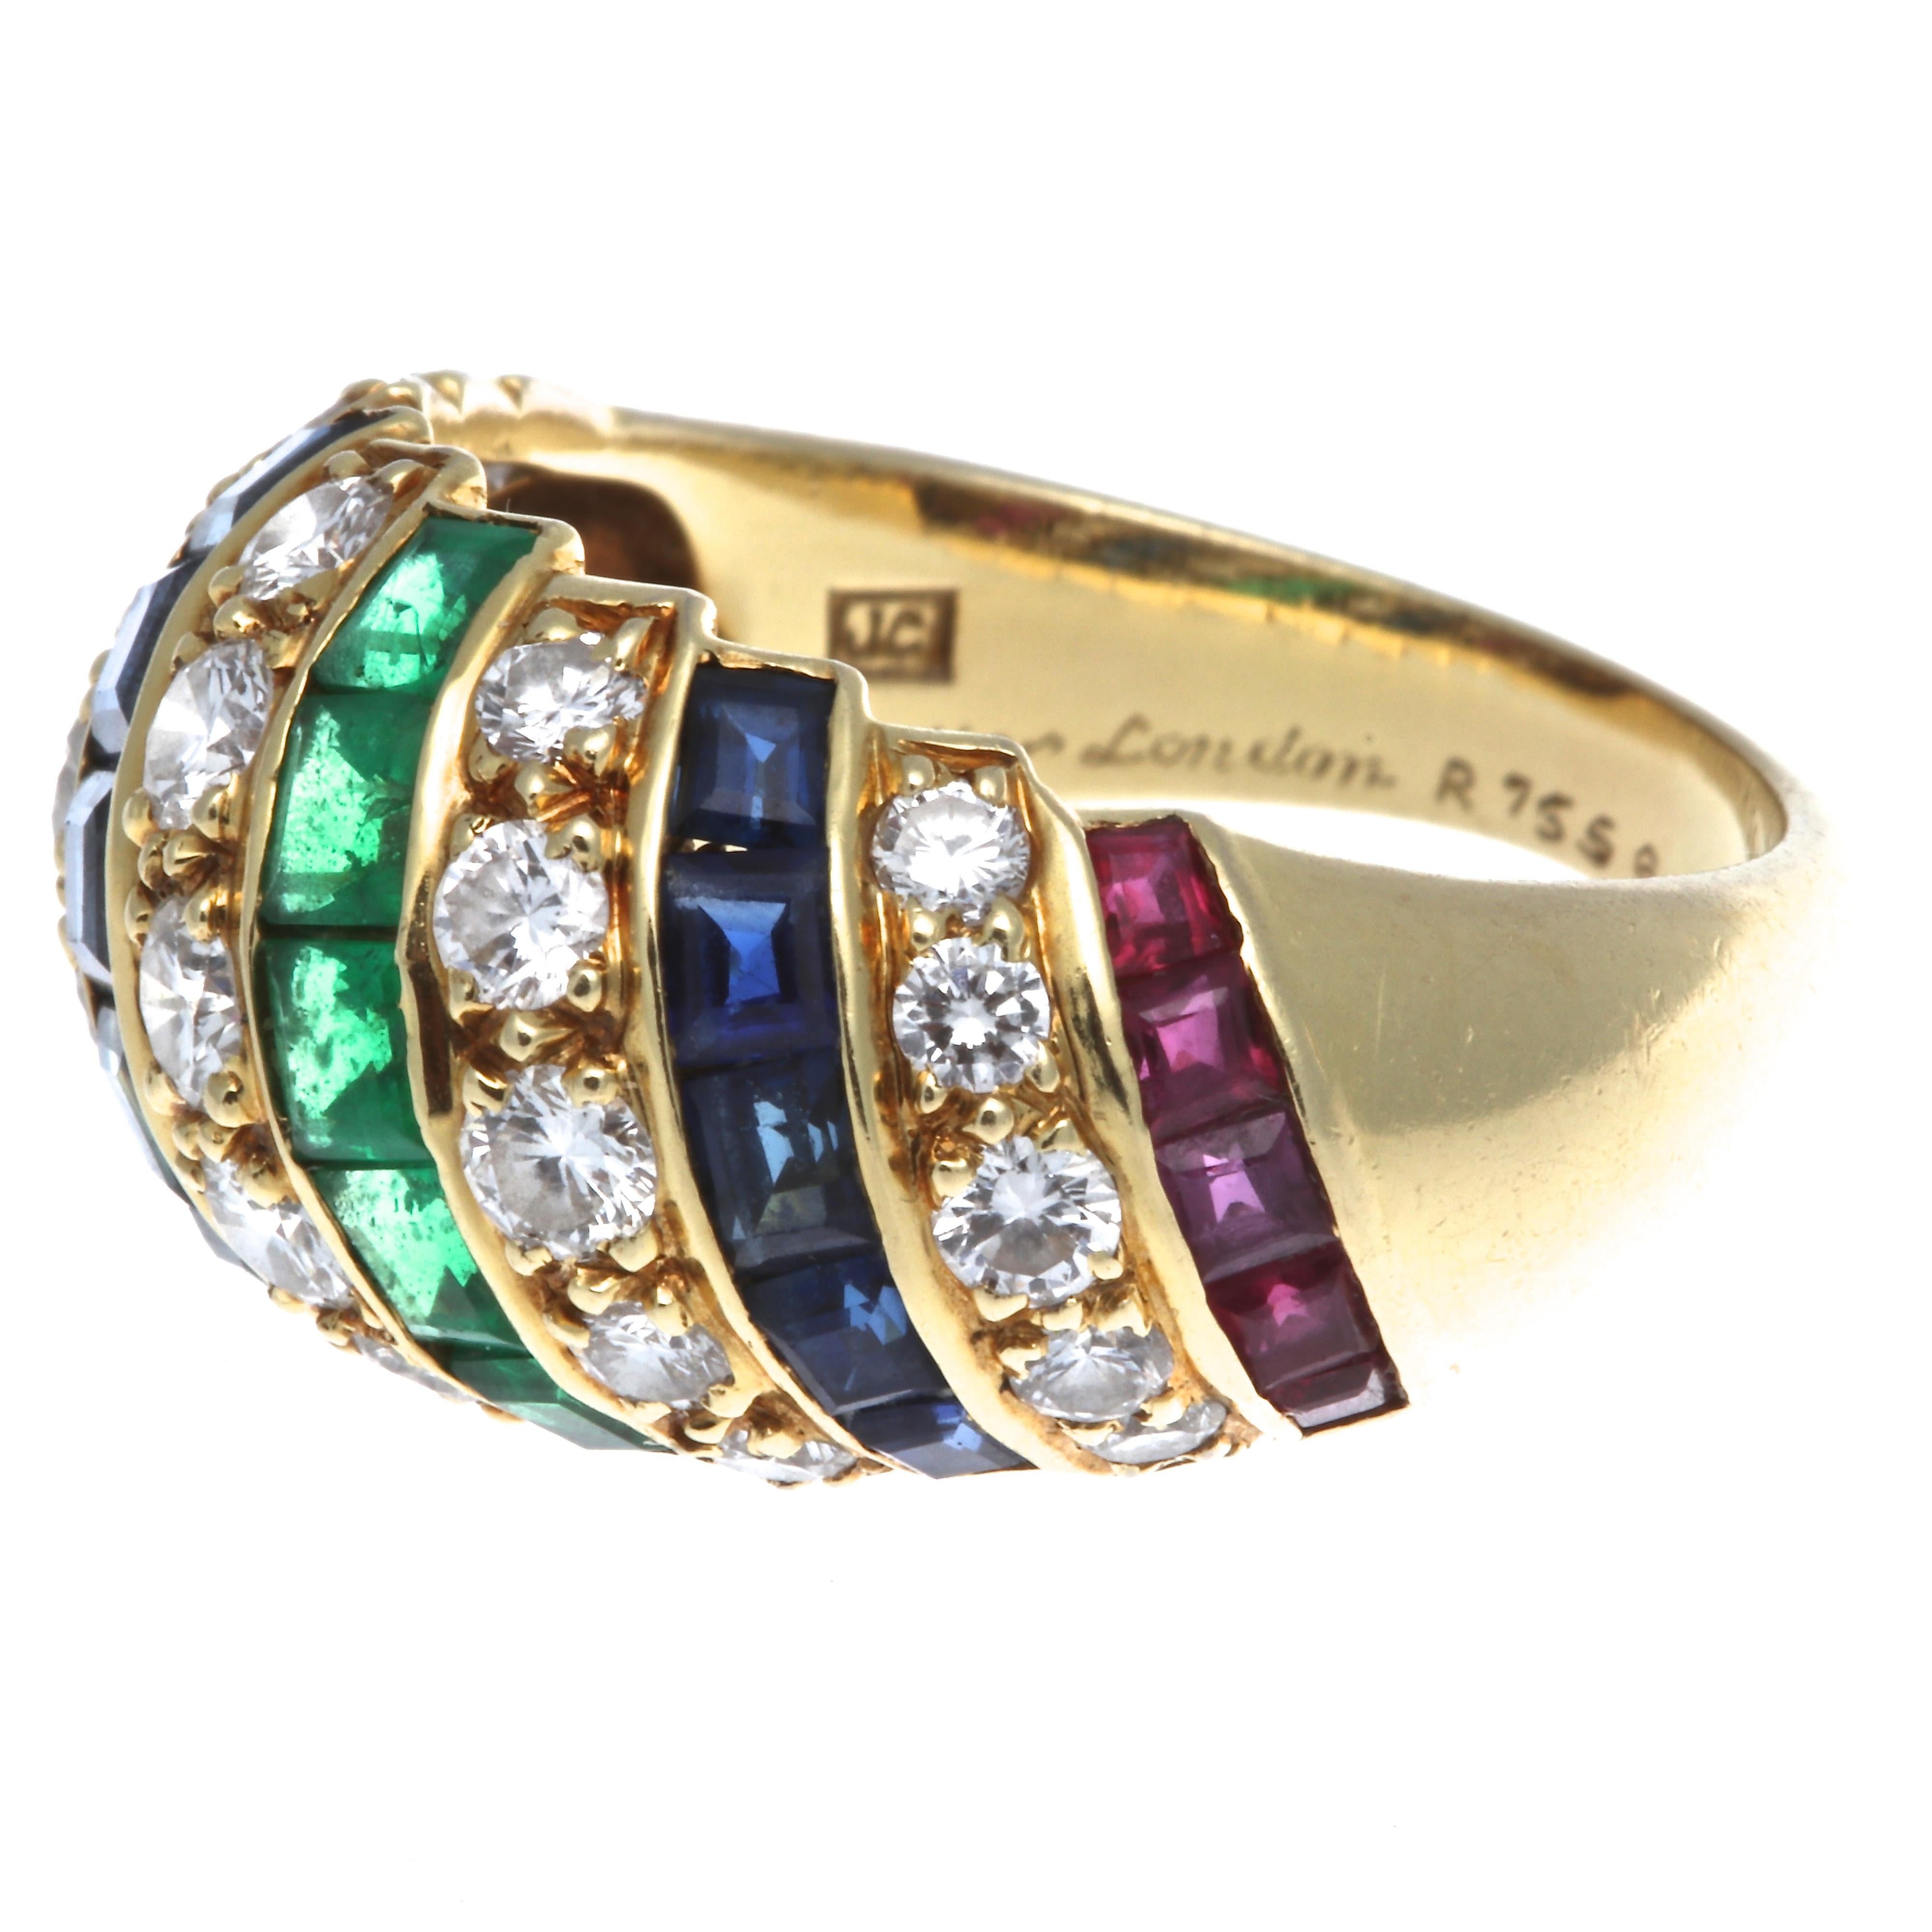 From the London house of Cartier comes a striking find in this ruby, sapphire, emerald, and diamond domed ring. Set in 18k gold are 10 rubies weighing approximately 1.20 carats, 10 sapphires that weigh approximately 2 carats, 5 emeralds that weigh